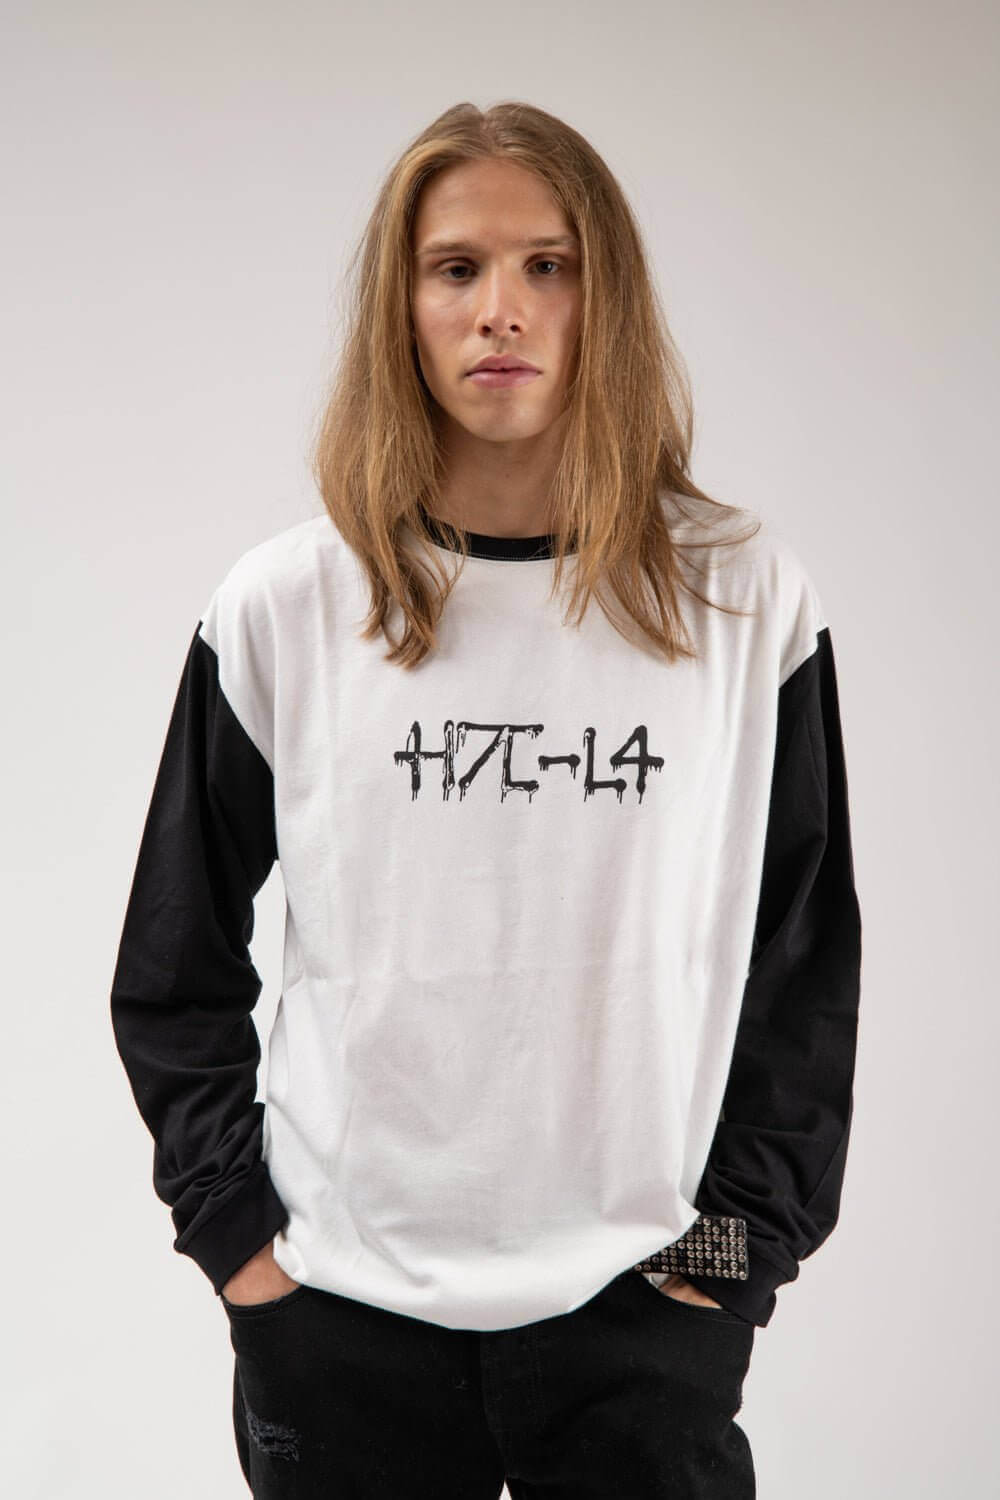 H7C-L4 LS Long-sleeves t-shirt with H7C-L4 script printed on the front. 100% cotton. Made in Italy HTC LOS ANGELES